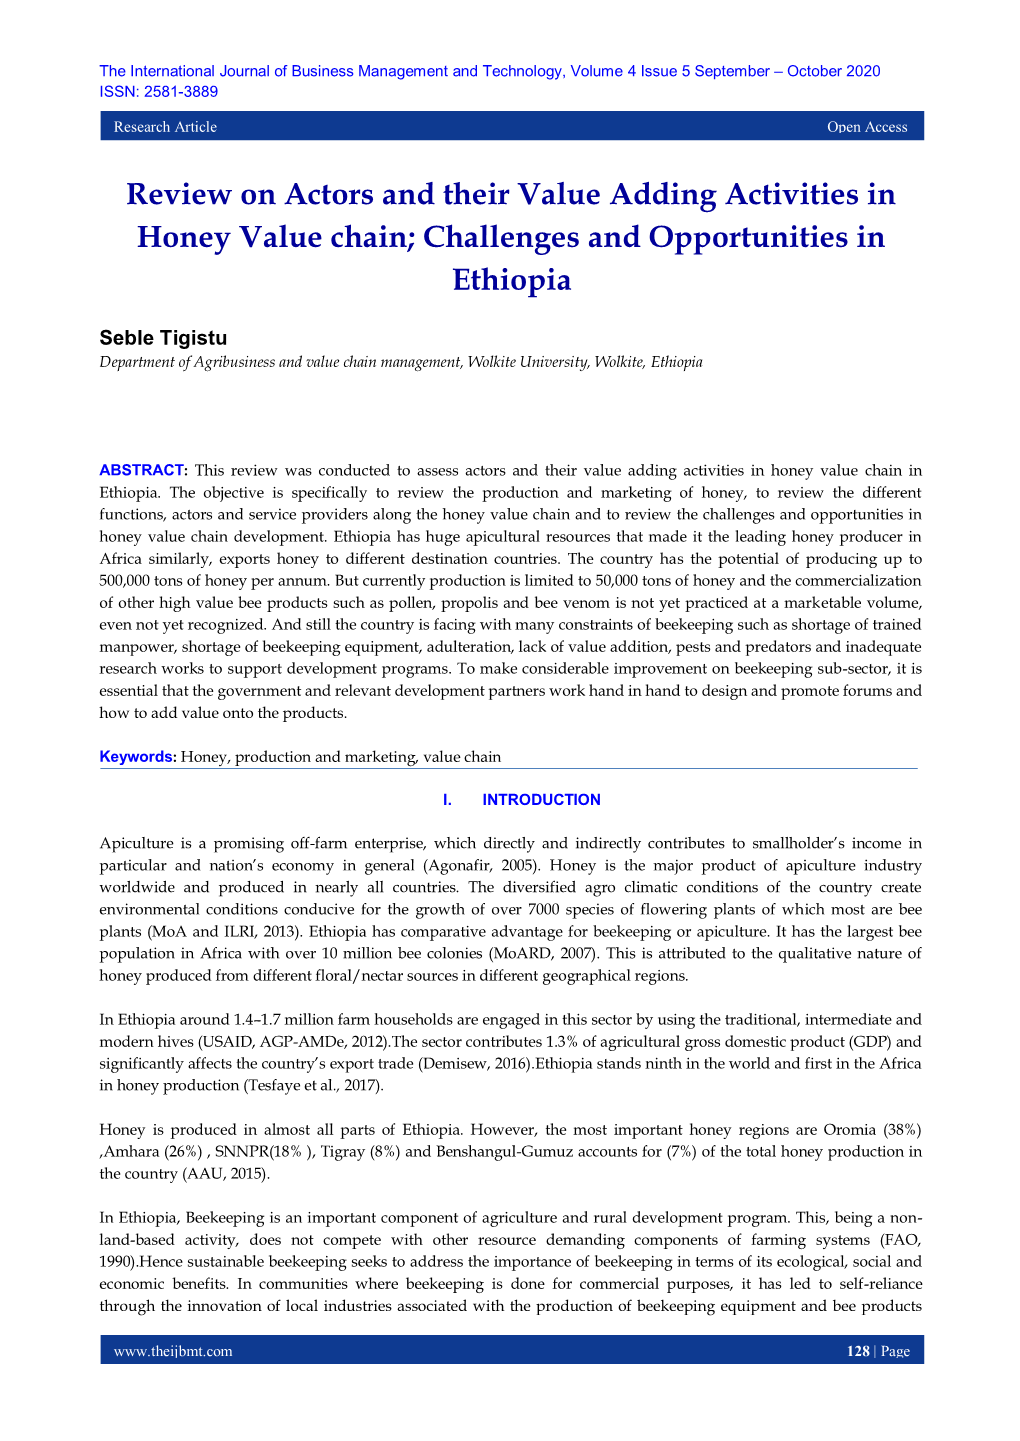 Review on Actors and Their Value Adding Activities in Honey Value Chain; Challenges and Opportunities in Ethiopia